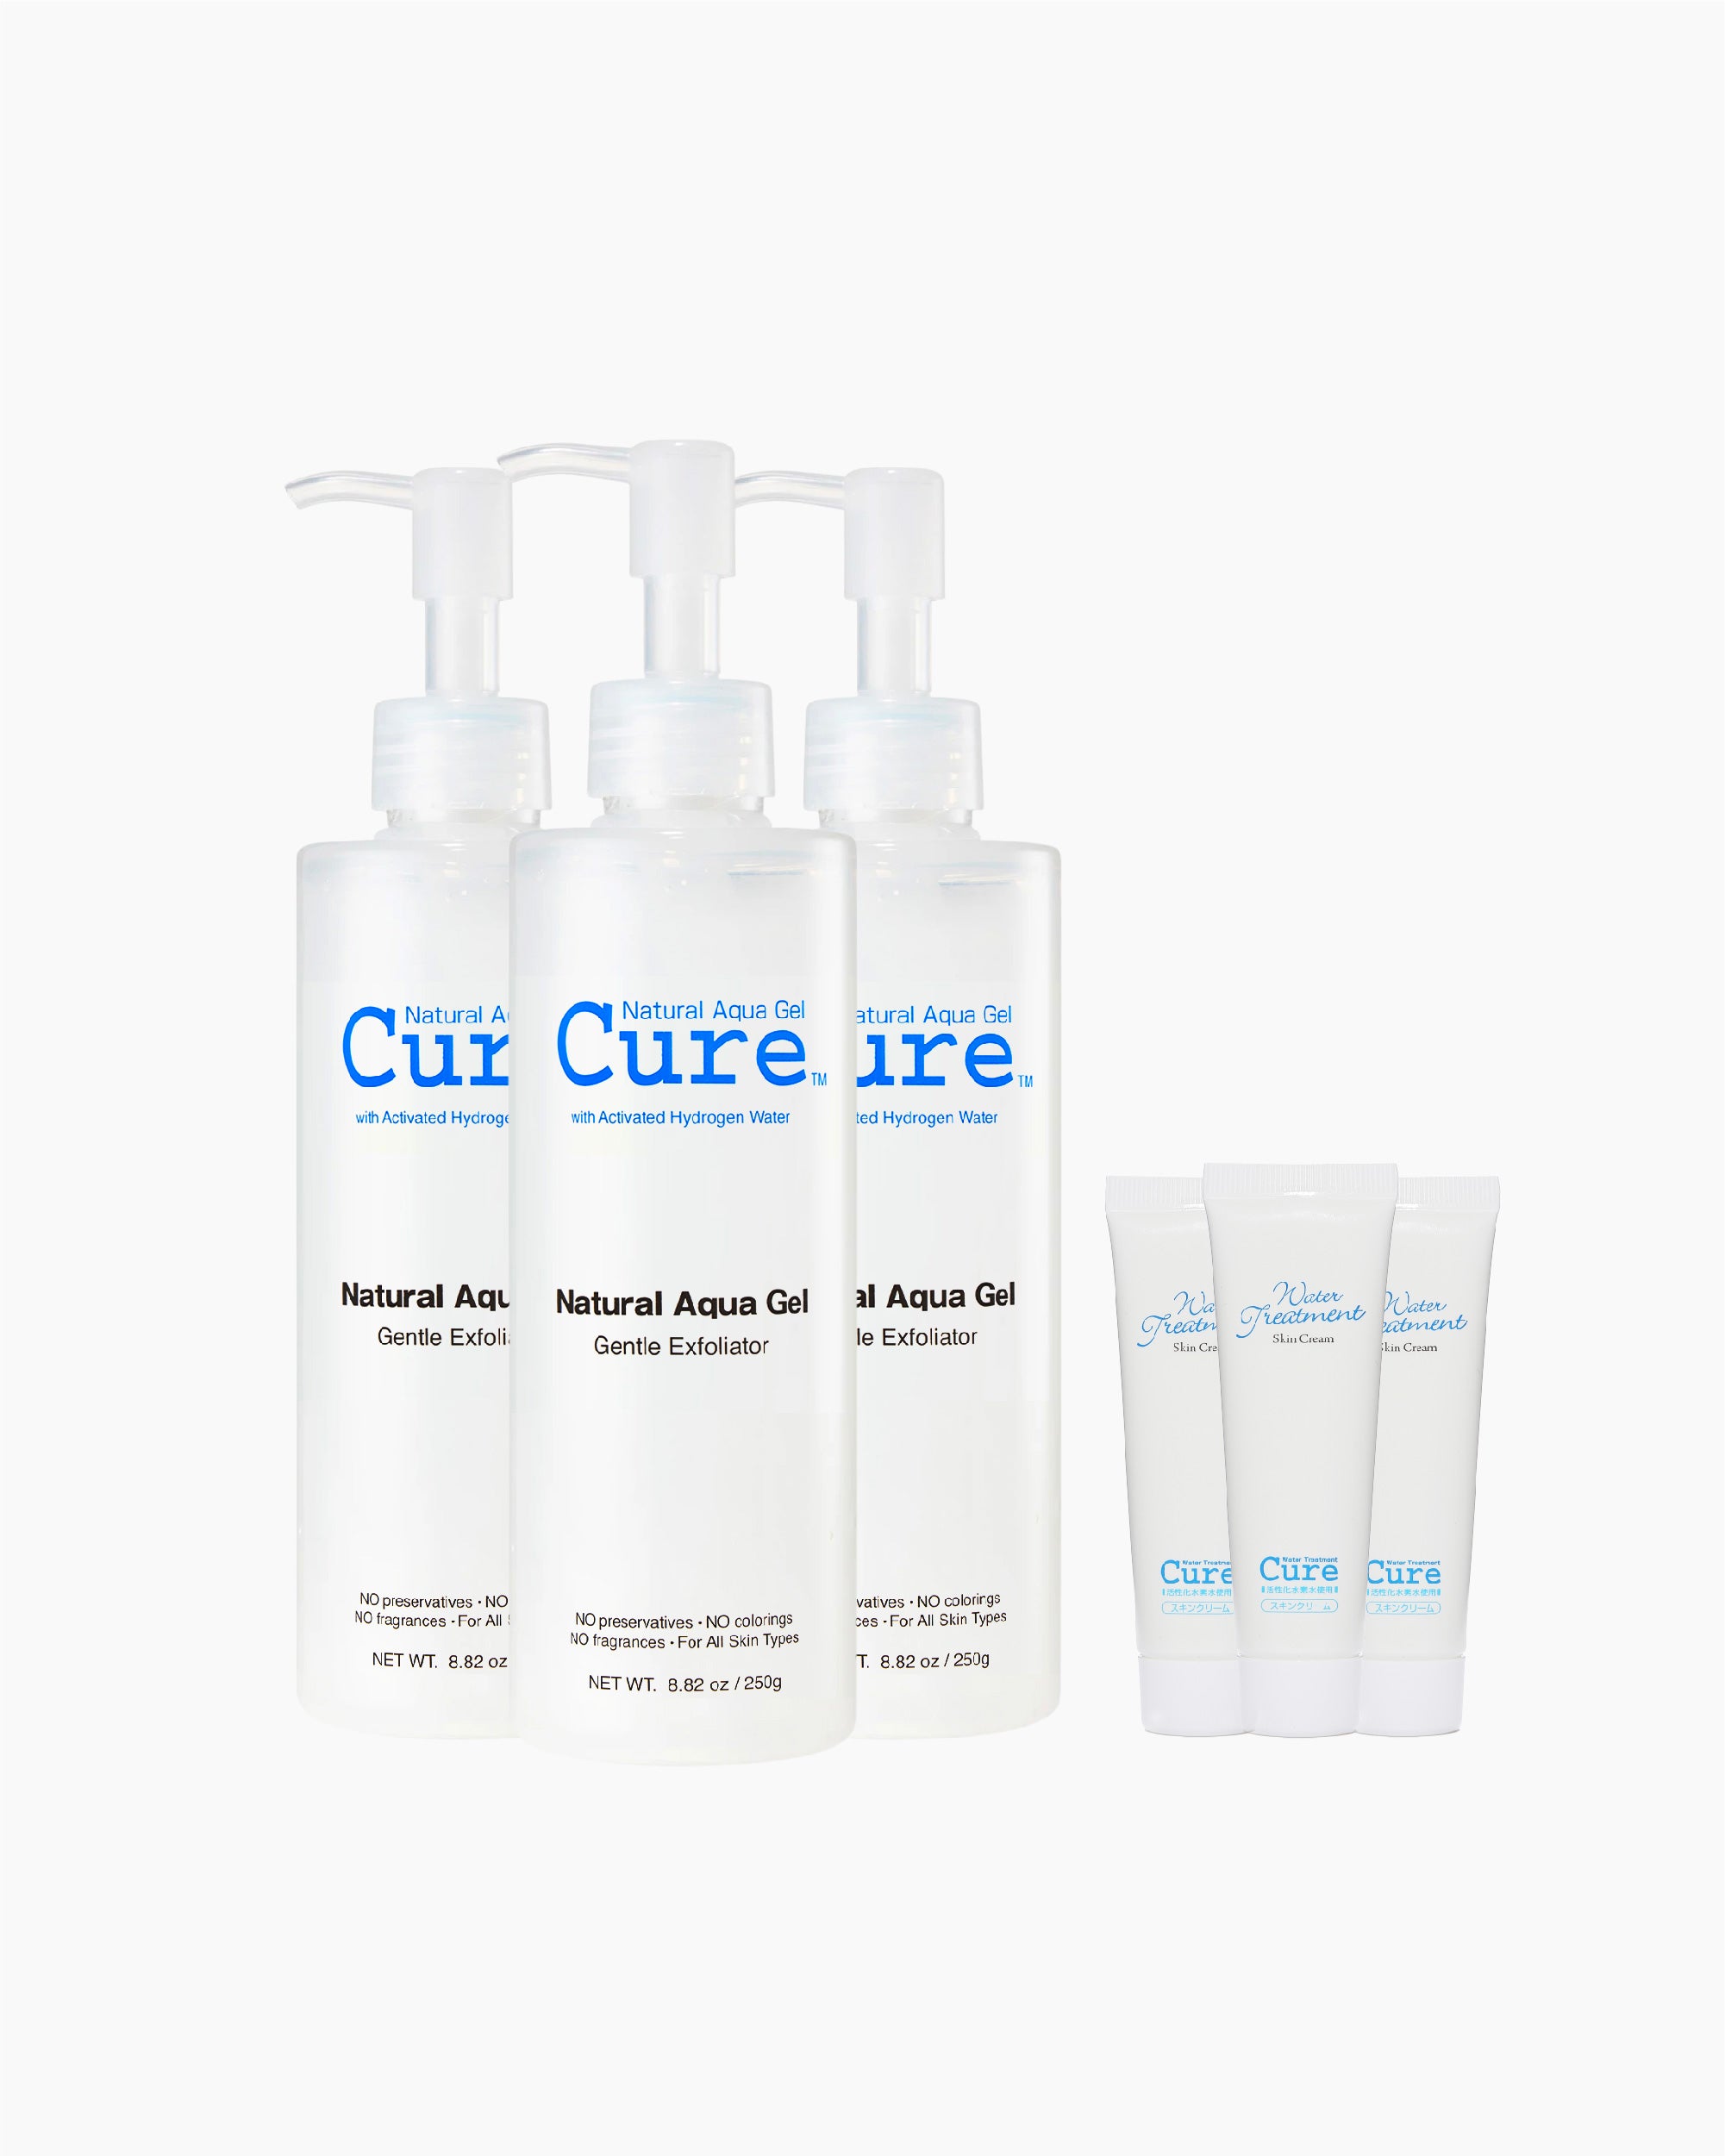 Cure Aqua Gel Review: The Best Japanese Peel Gel for Soft, Smooth Skin